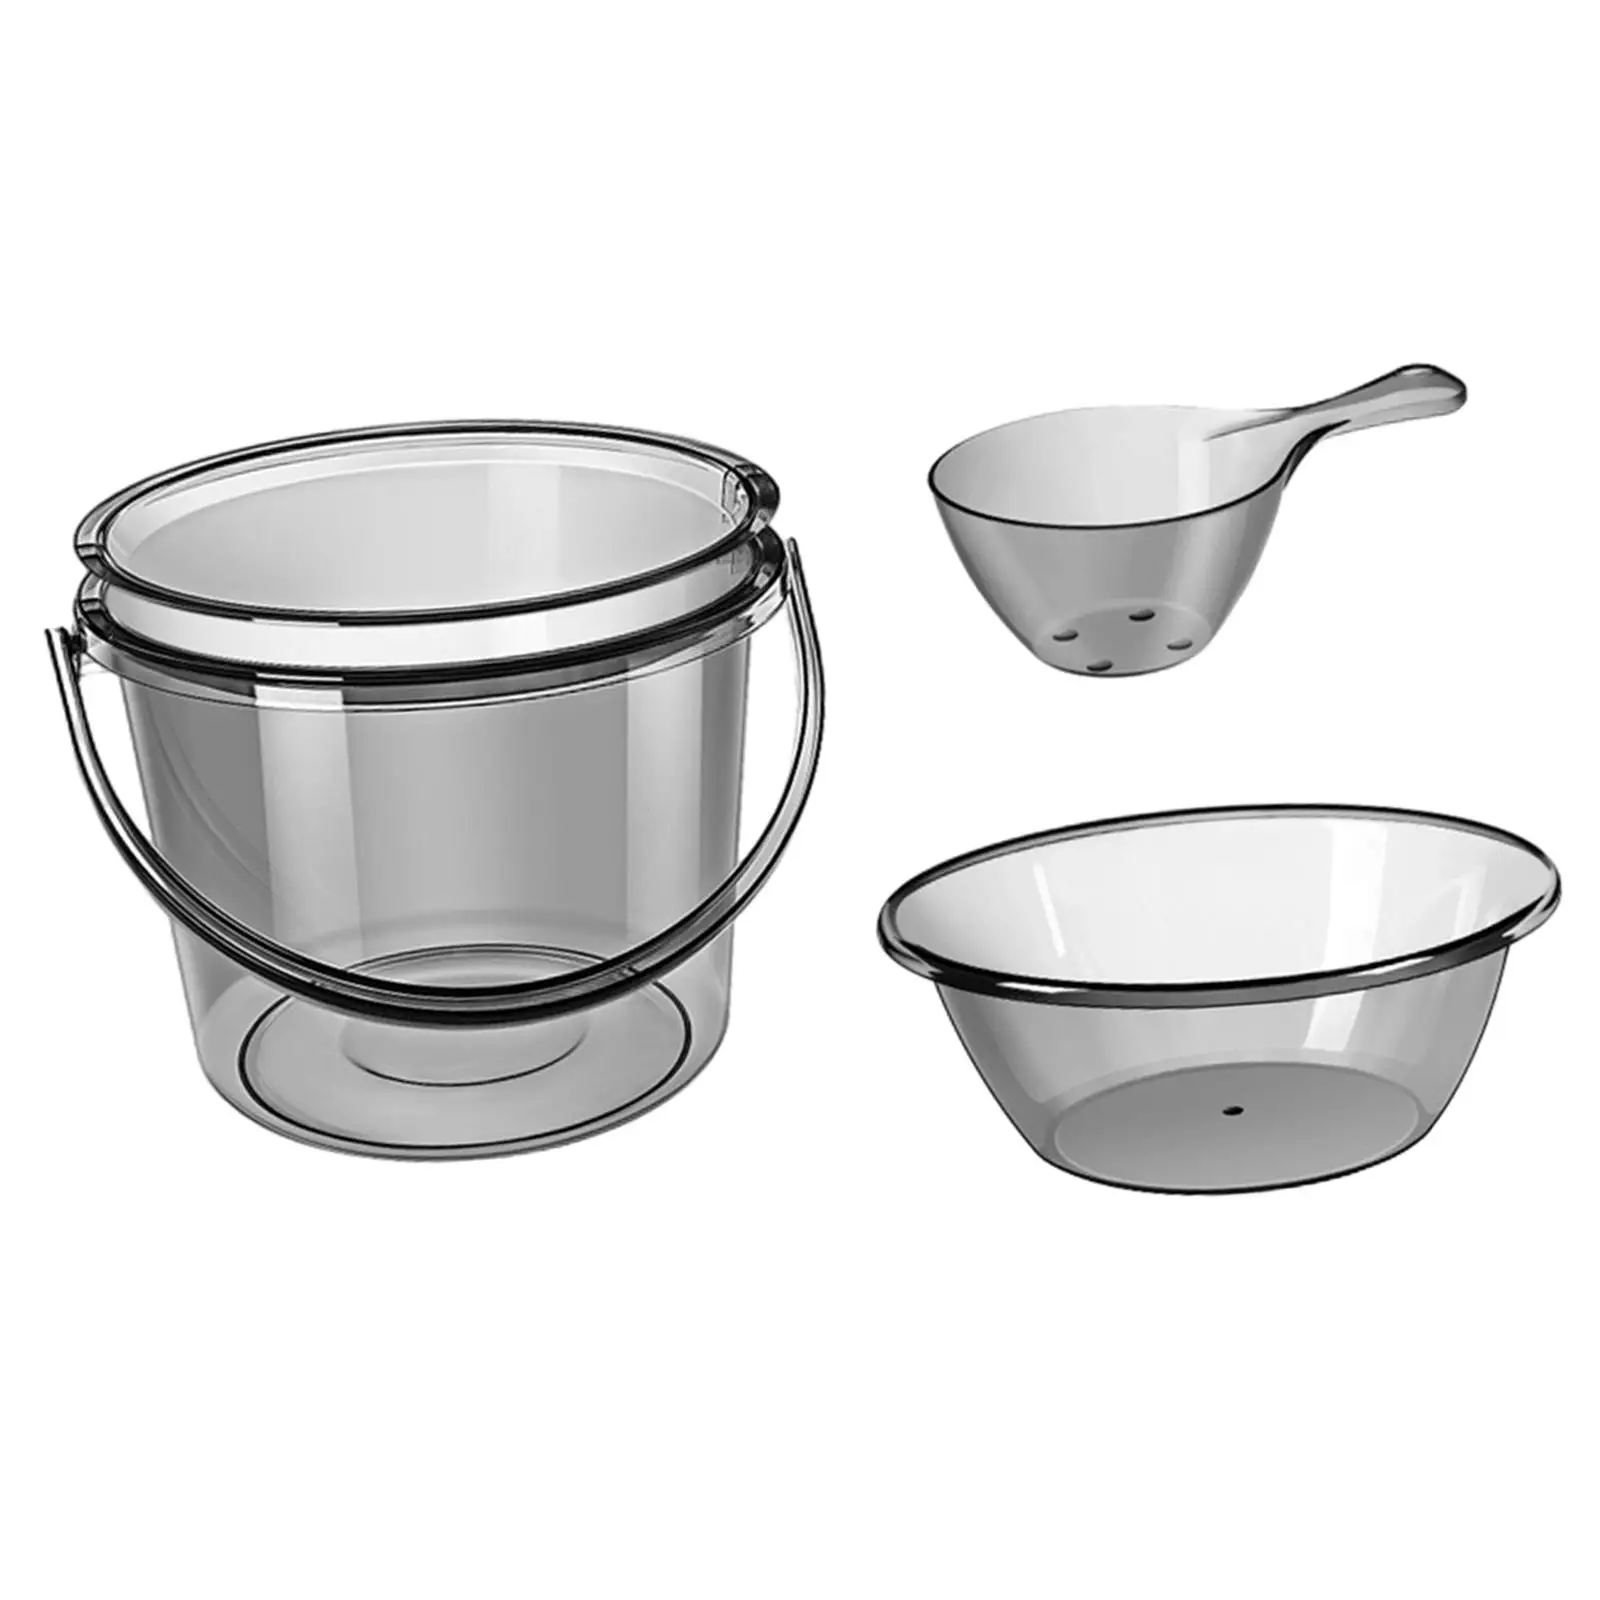 Water Bucket Set Cleaning Bucket Water Pail with Basin Spoon Water Storage Bucket for Fishing Dormitory Outdoor Beach Gardening